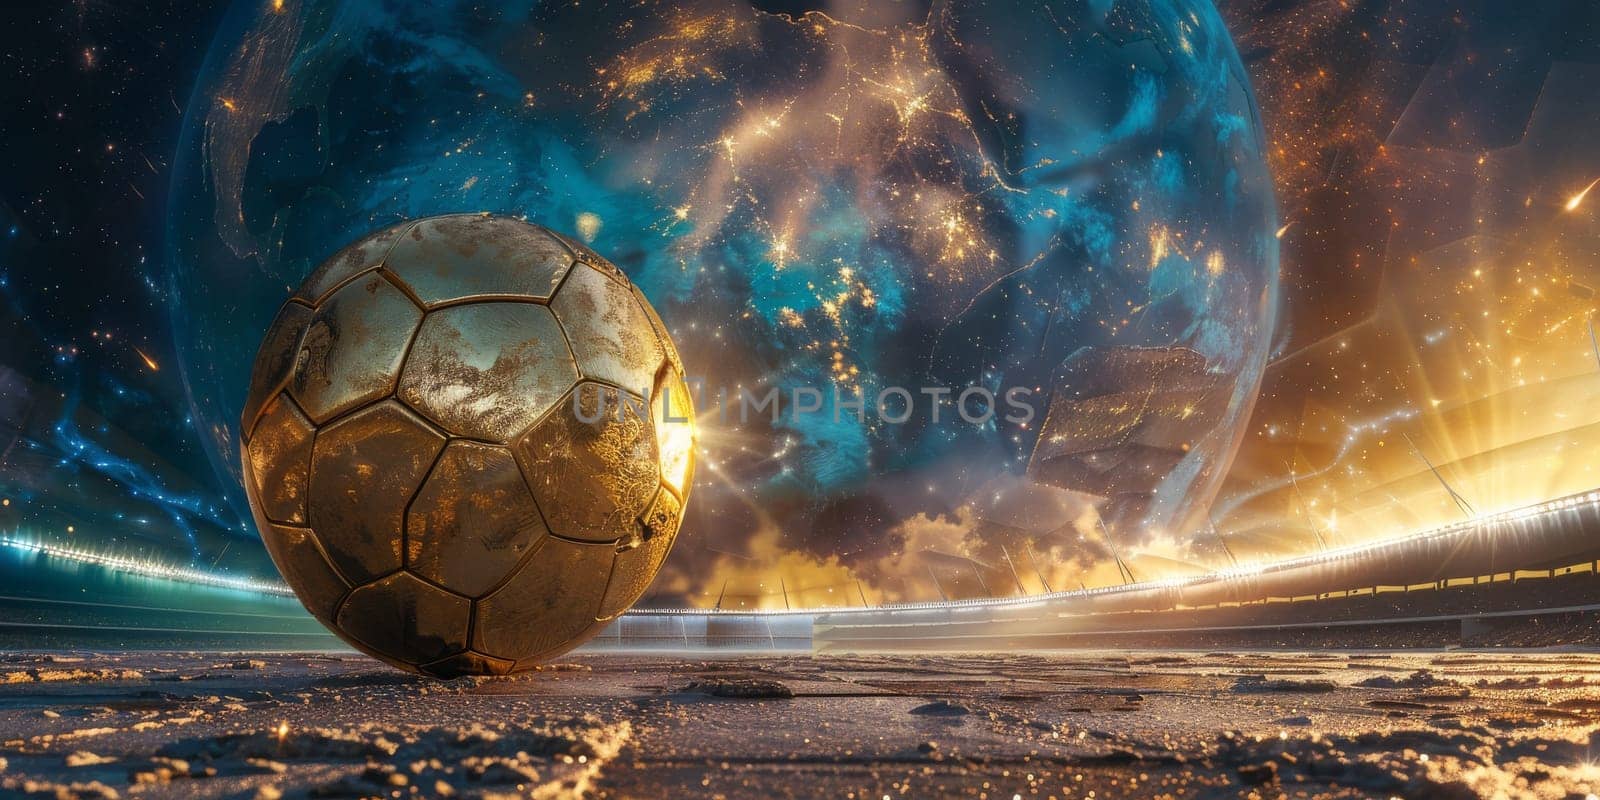 A gold soccer ball sits on a field. The ball is surrounded by grass and the field is lit up